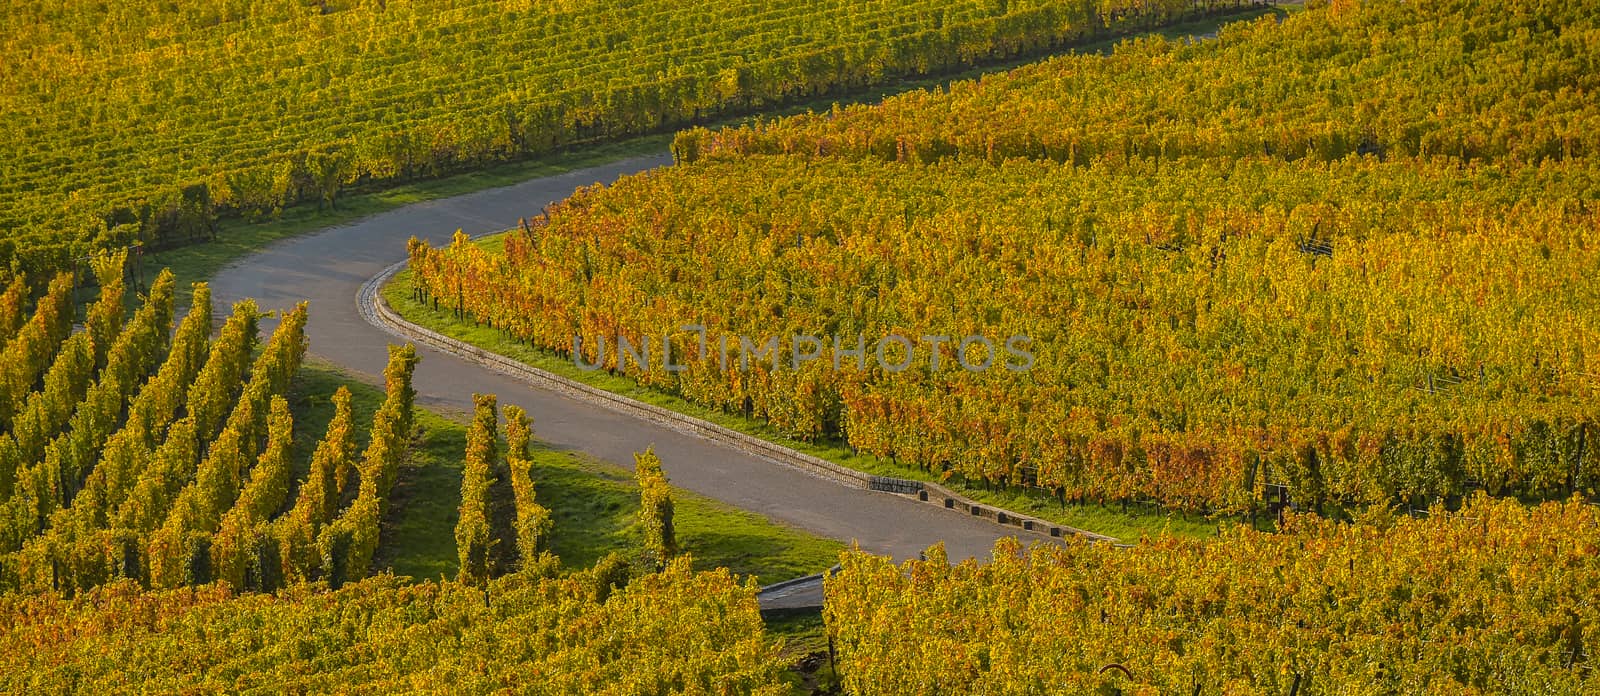 Alsace Vineyards, in autumn, France by FreeProd